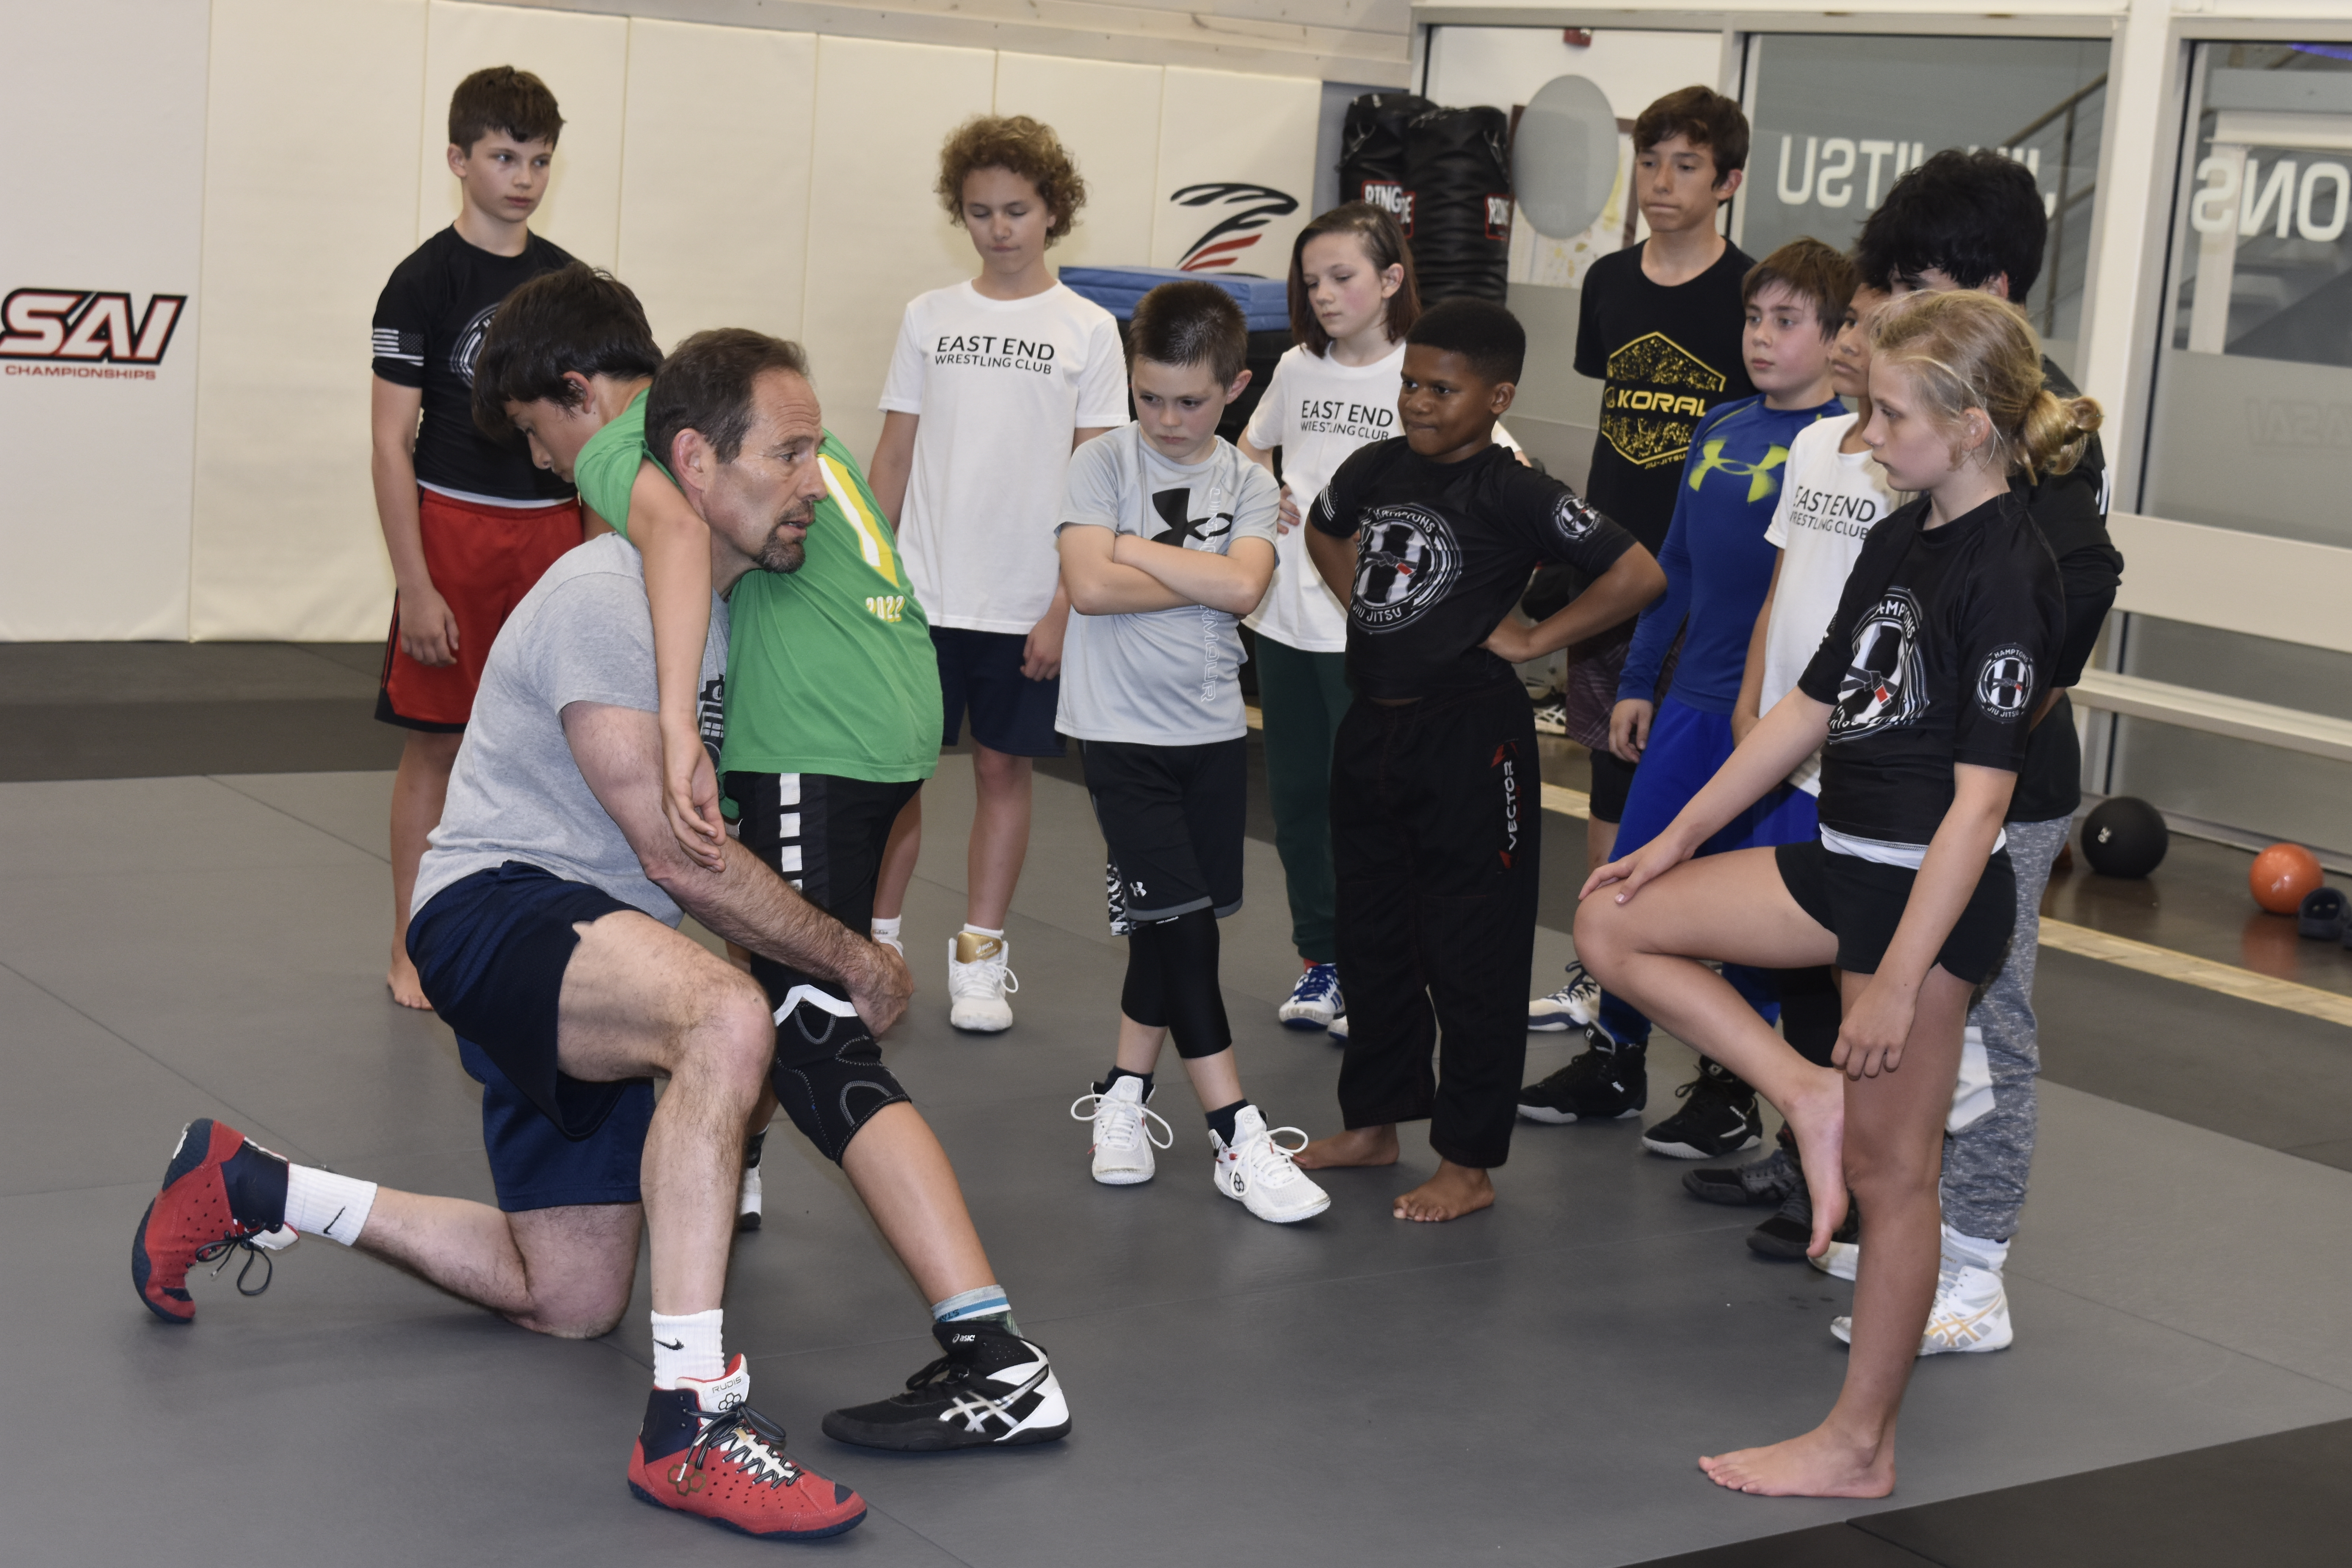 Hall of Fame coach Jon Tush leads a class of fourth-eighth graders on Monday.   DREW BUDD